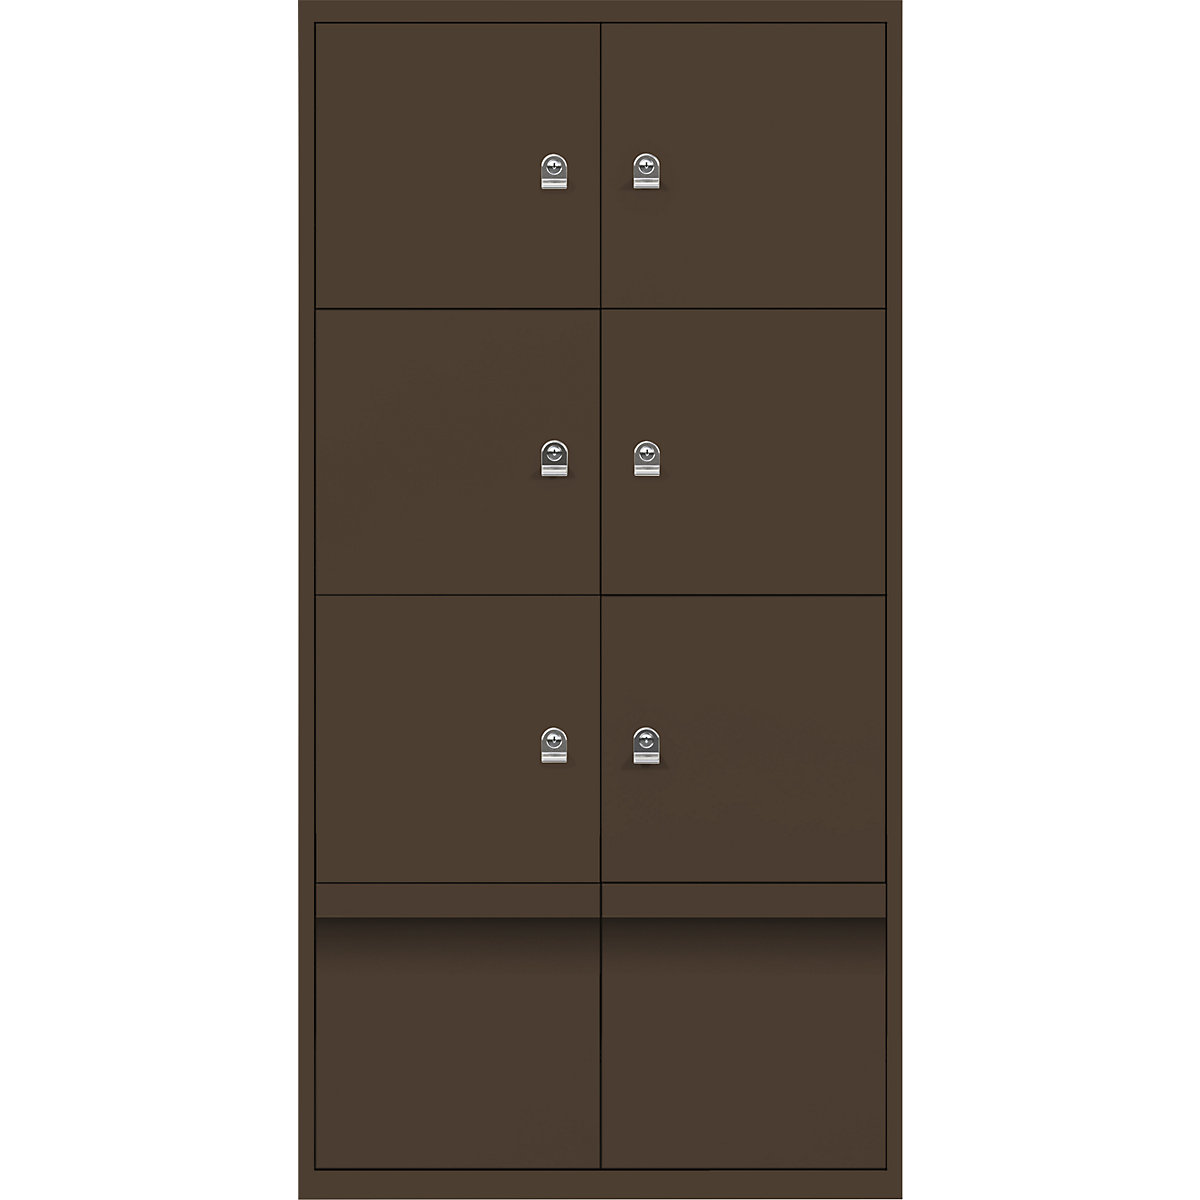 BISLEY – LateralFile™ lodge, with 6 lockable compartments and 2 drawers, height 375 mm each, coffee